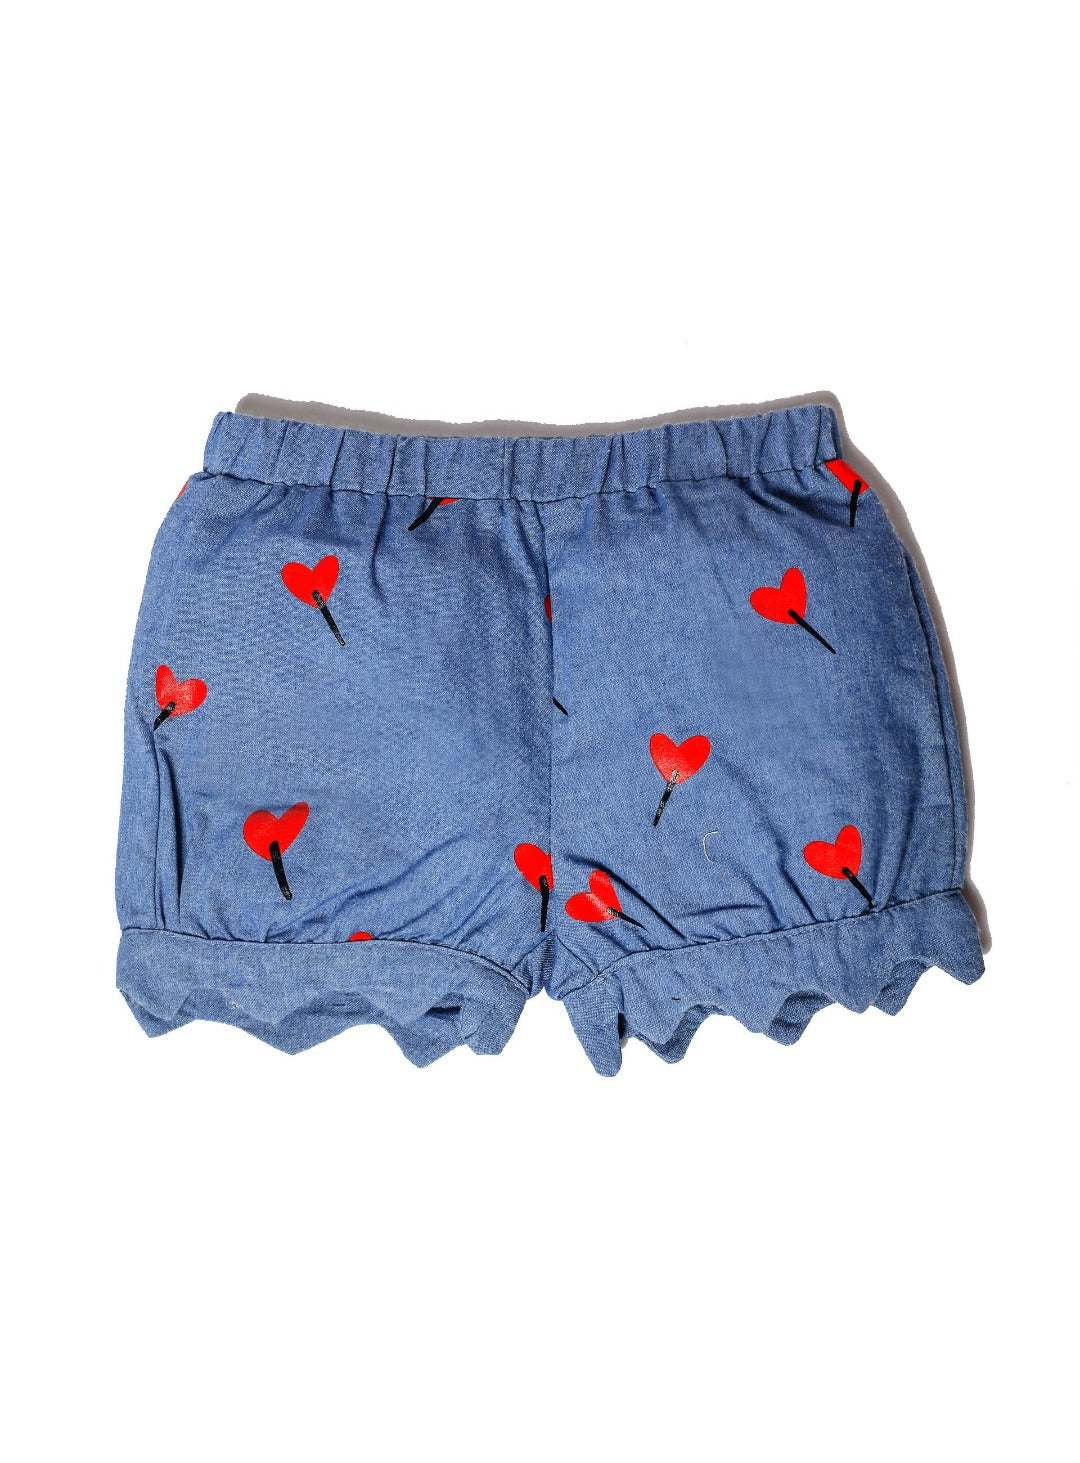 blue denim short with red heart print